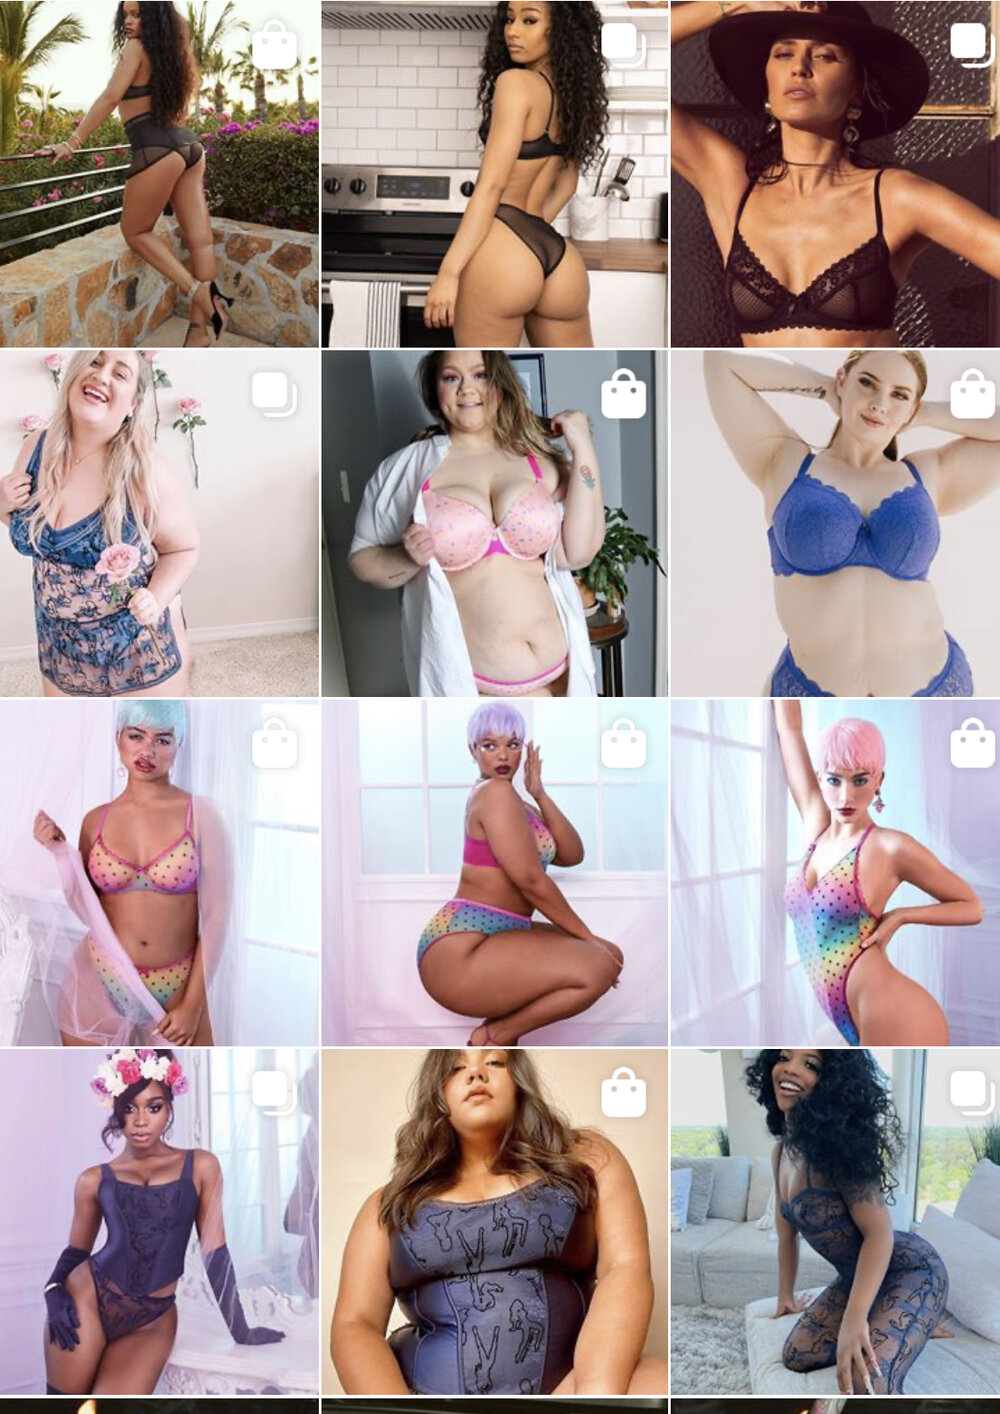 On Instagram, Savage x Fenty features women of all shapes and sizes rocking lingerie. Photo: @savagexfenty